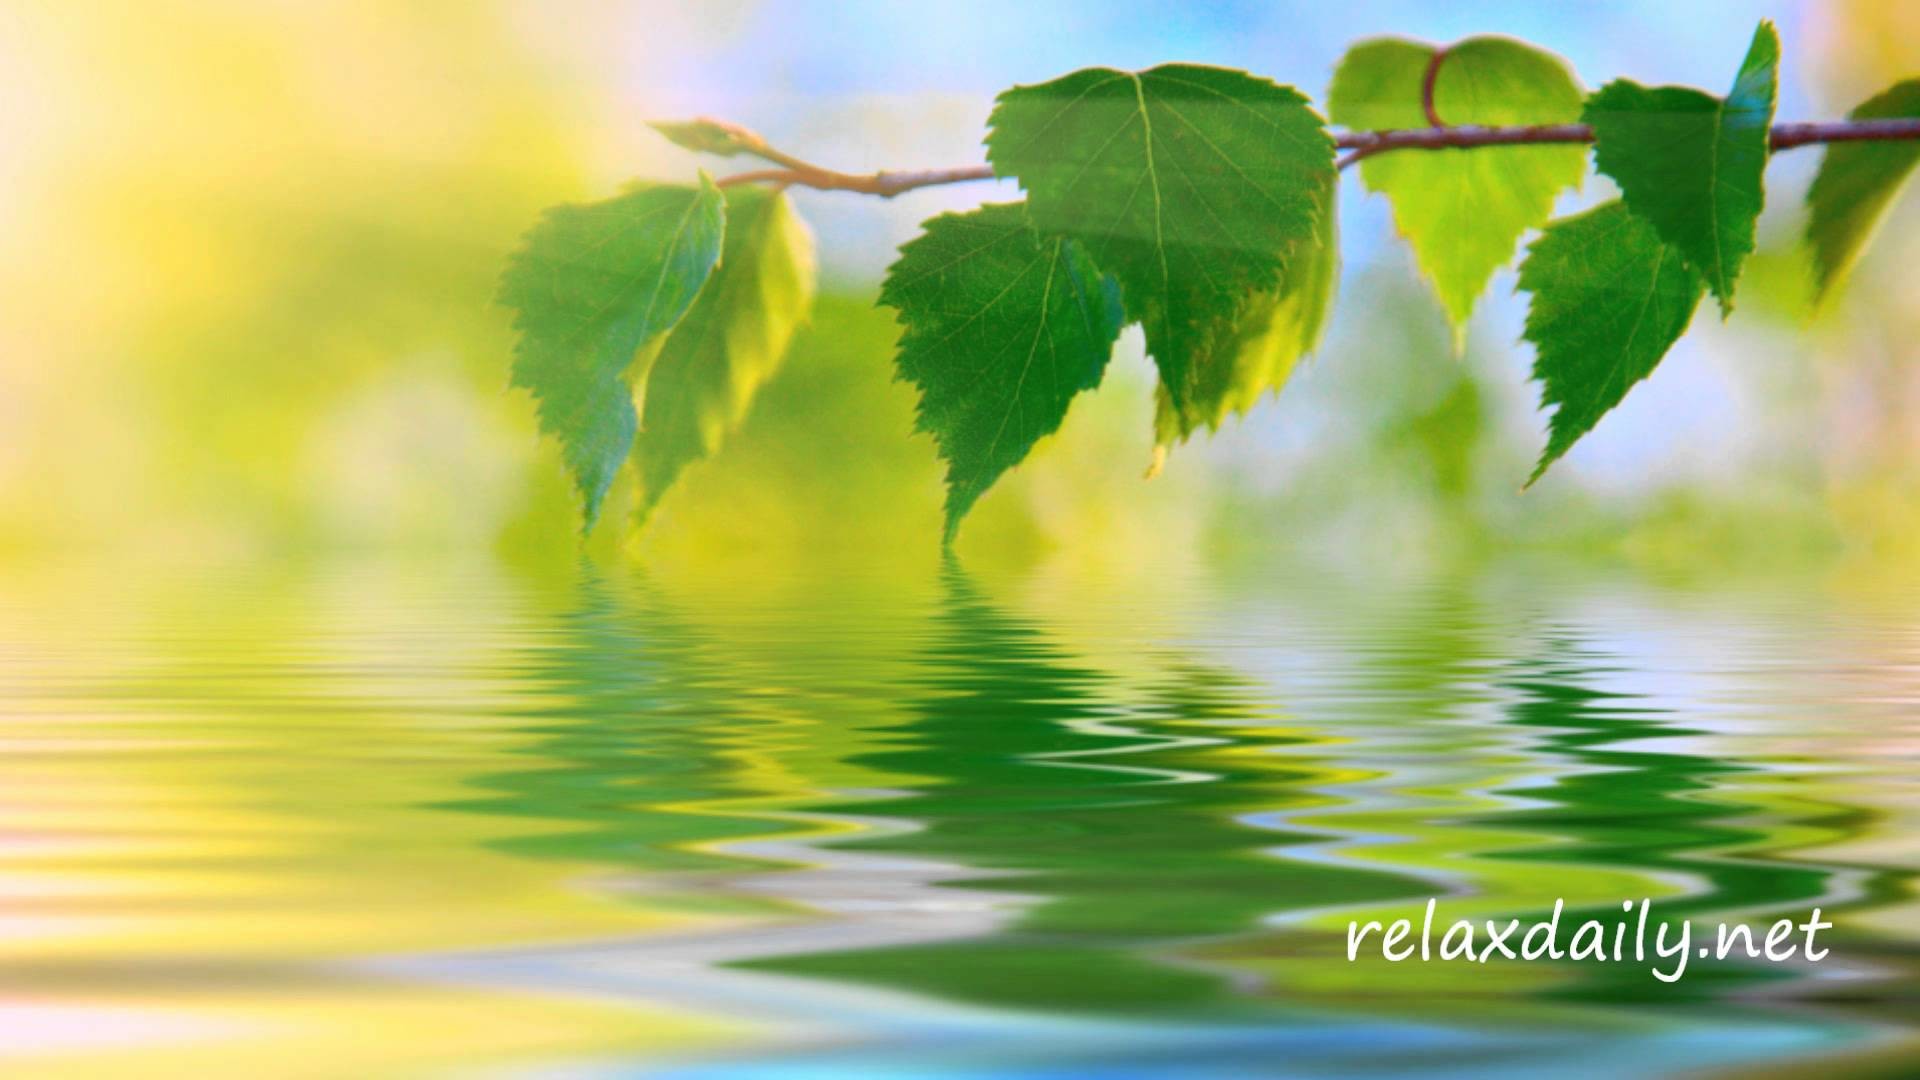 1920x1080 Calm Music - Slow, Peaceful, Background Music - relaxdaily NÂ°042 - YouTube